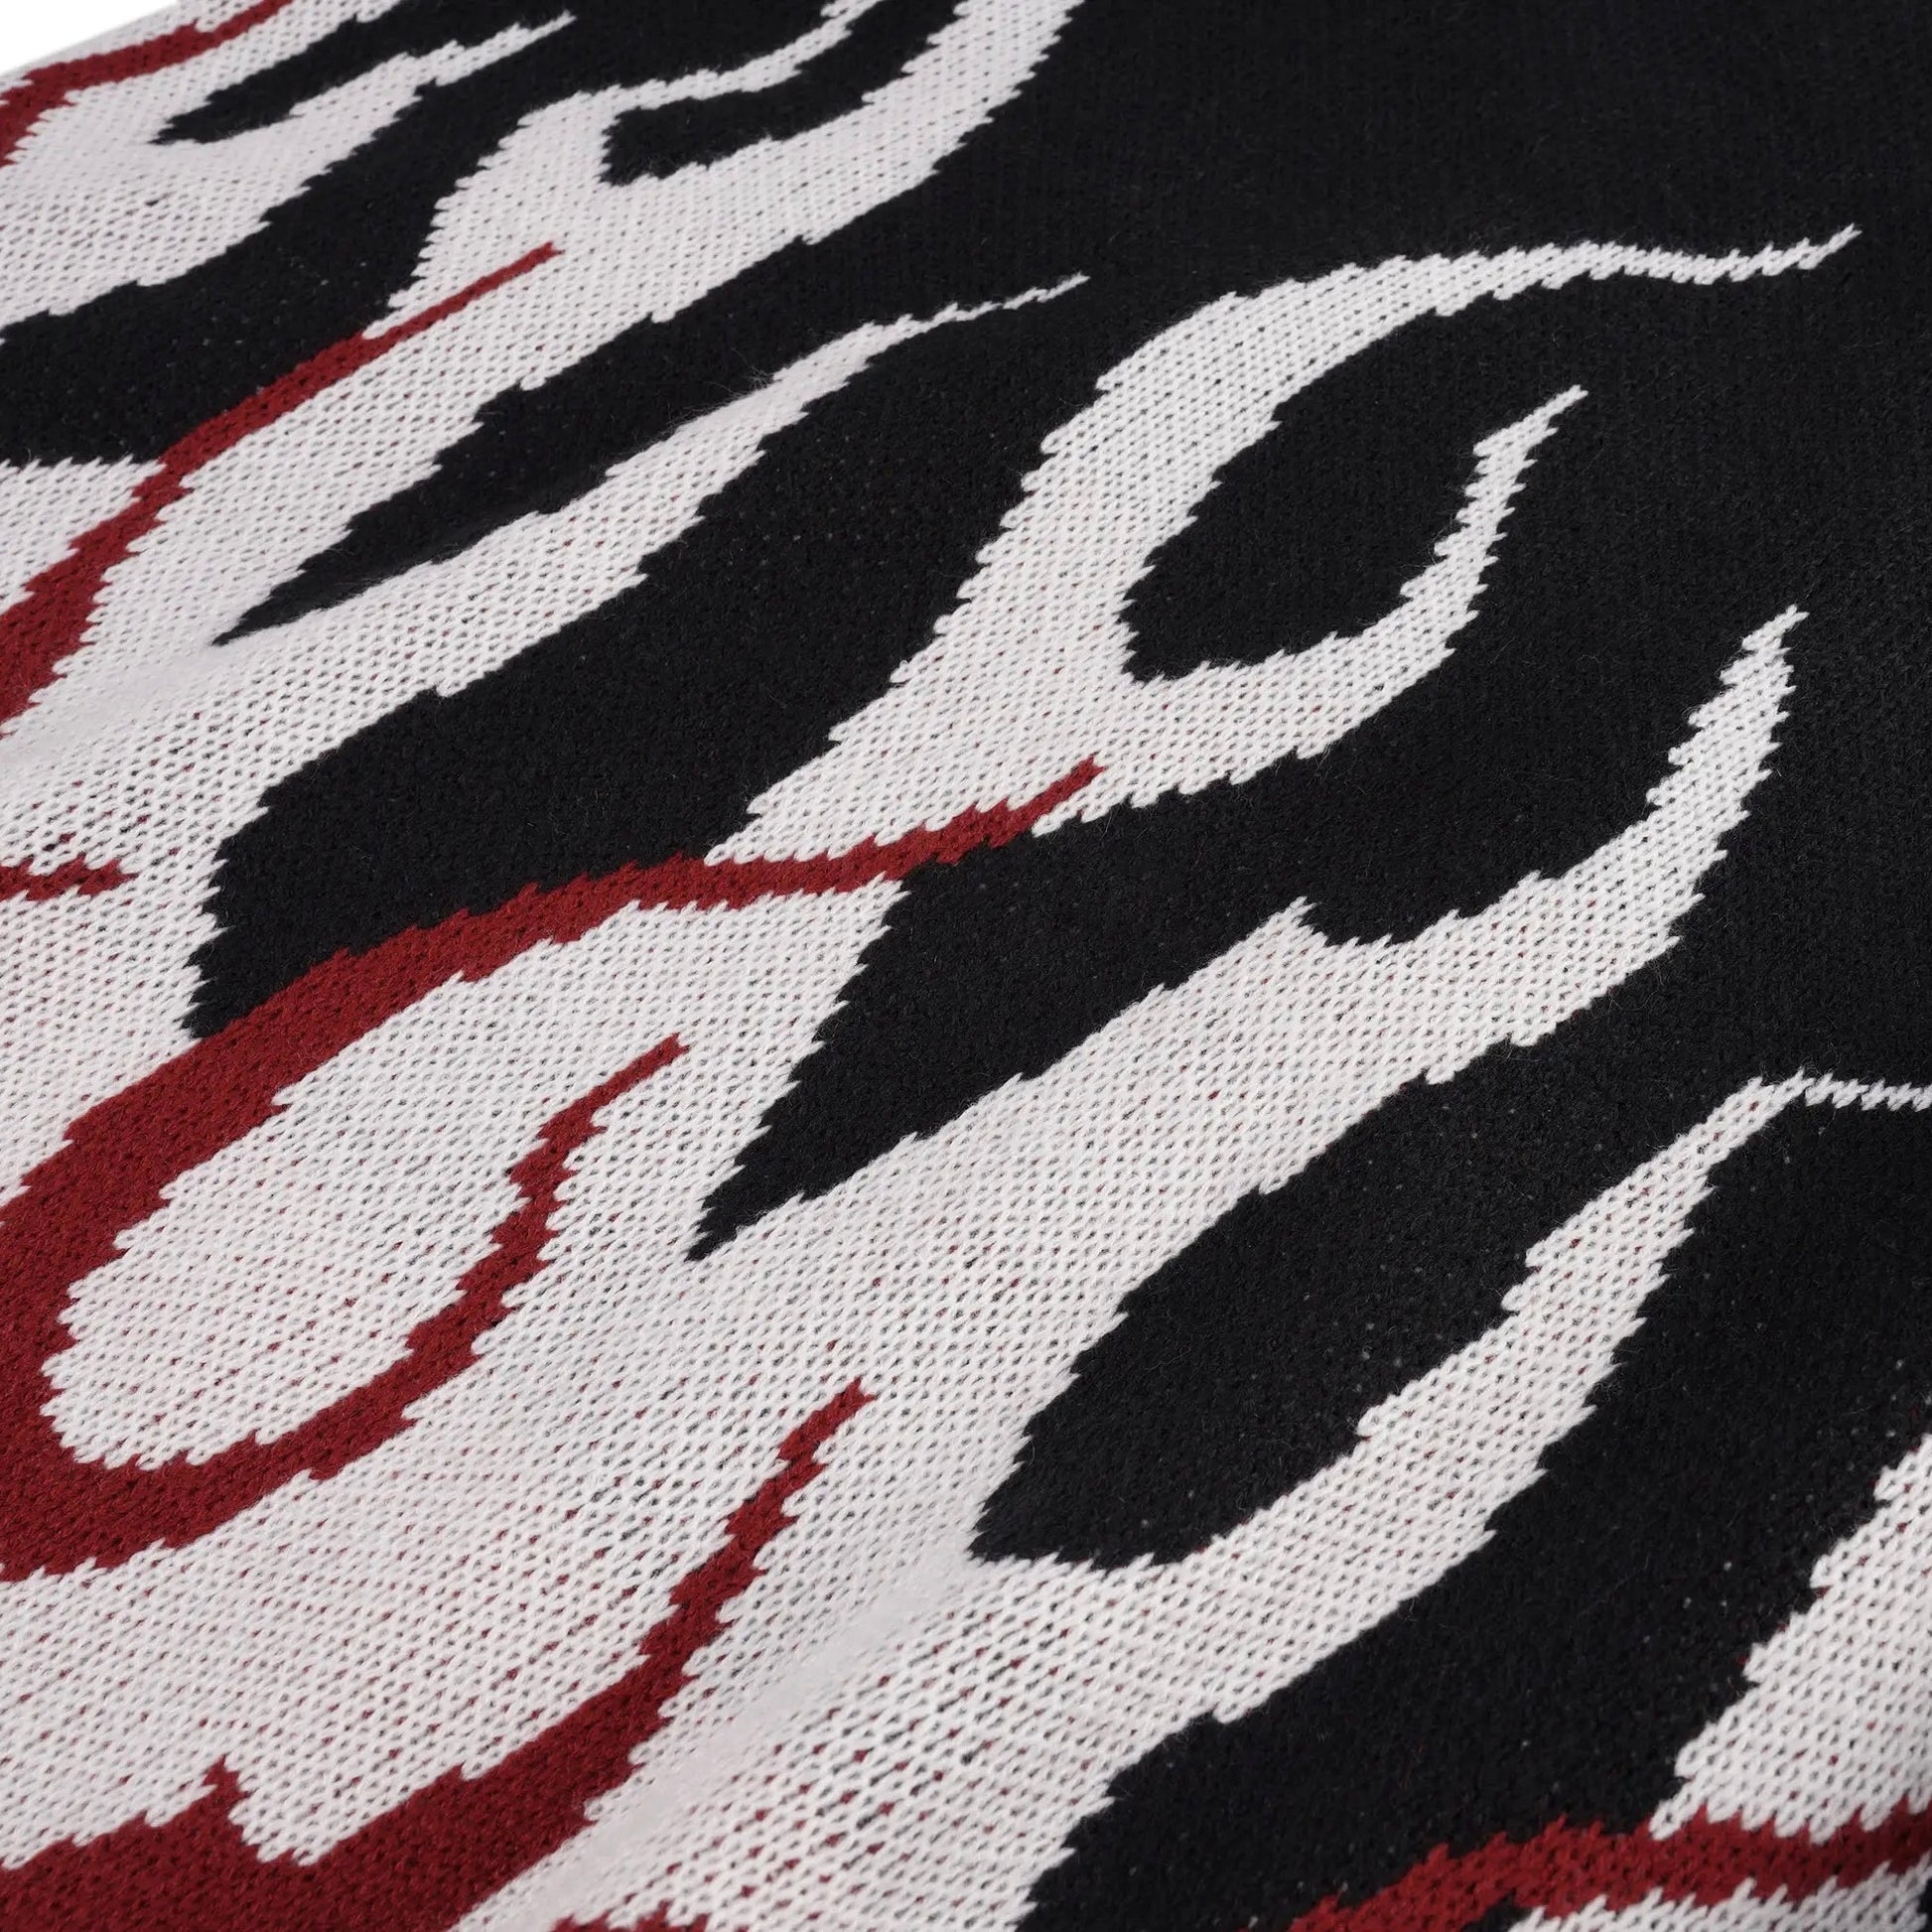 Vintage Flames Knitted Sweater